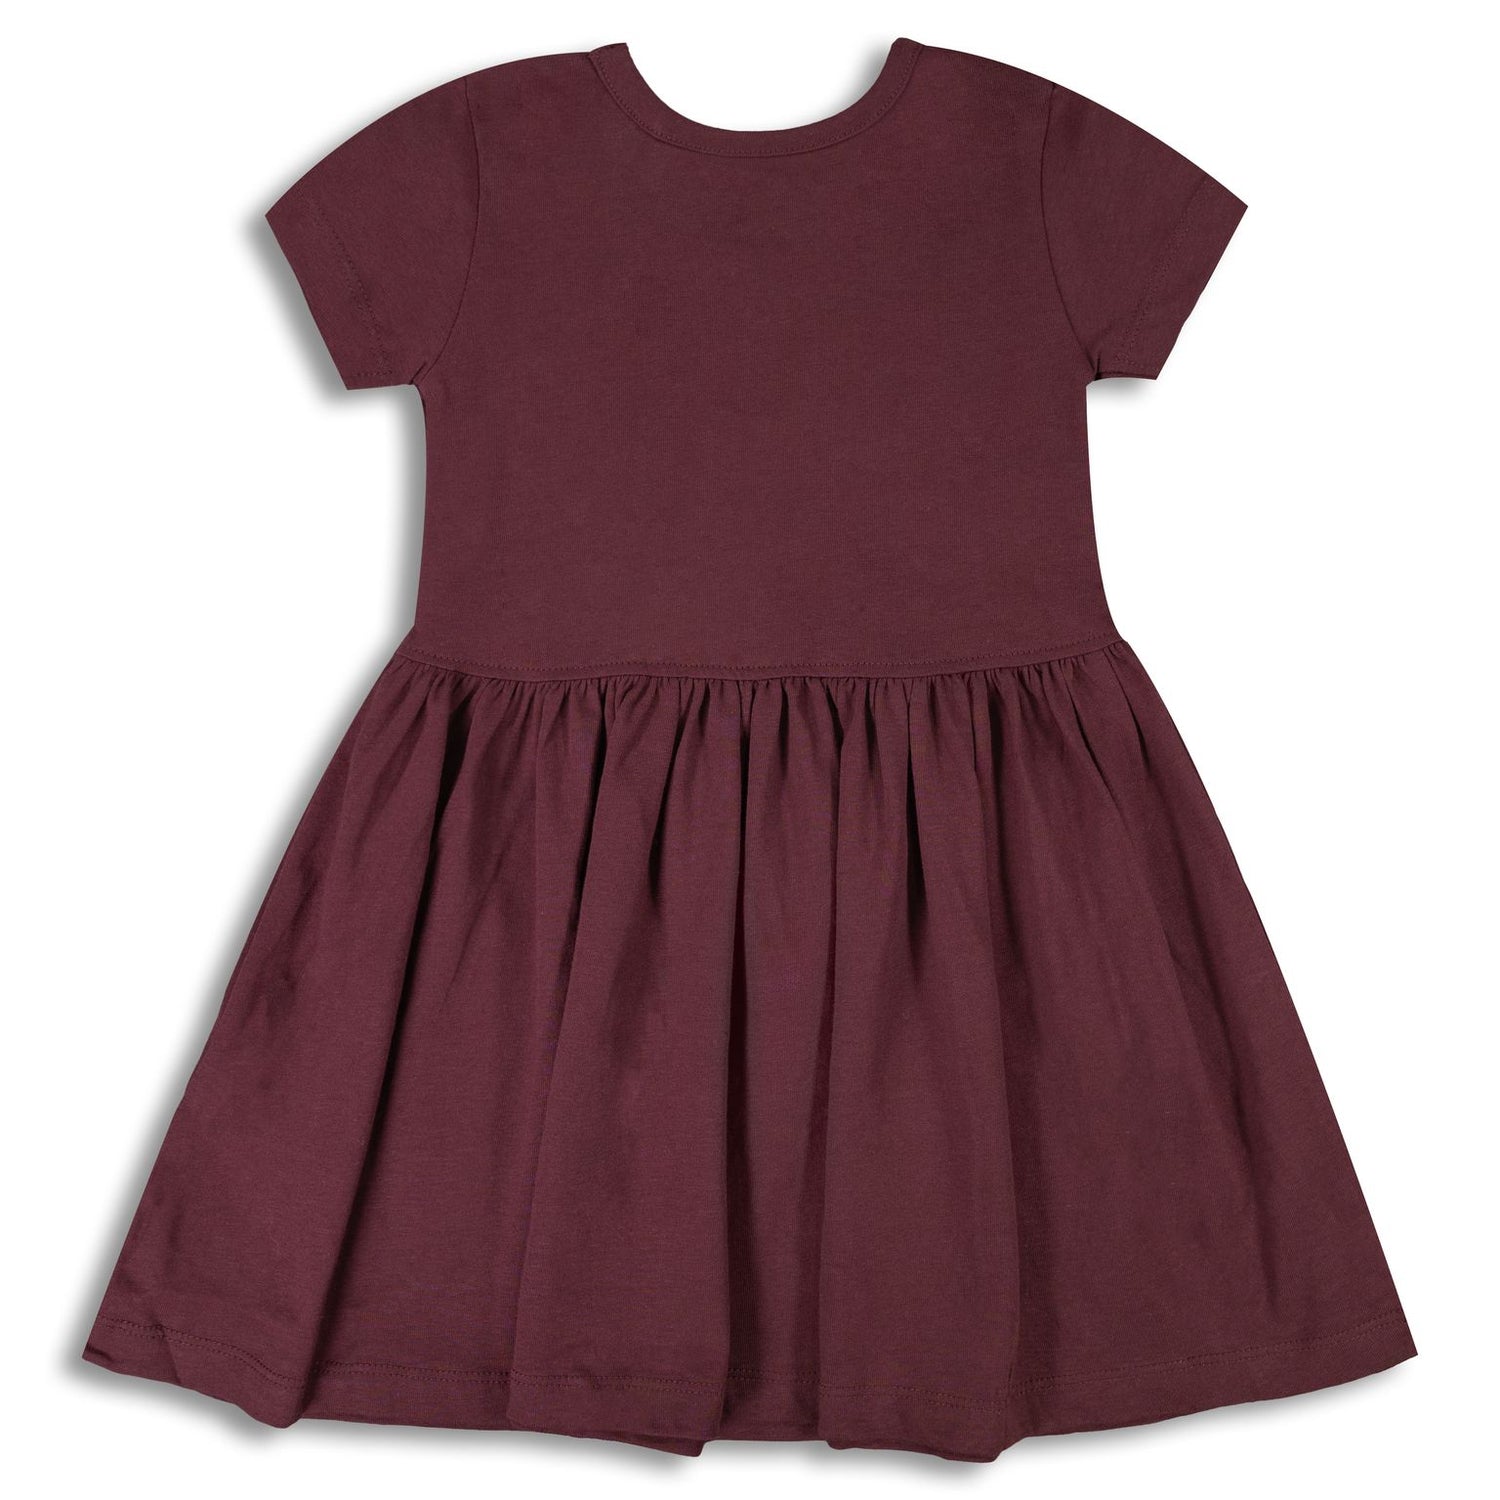 Molly Tiered Dress